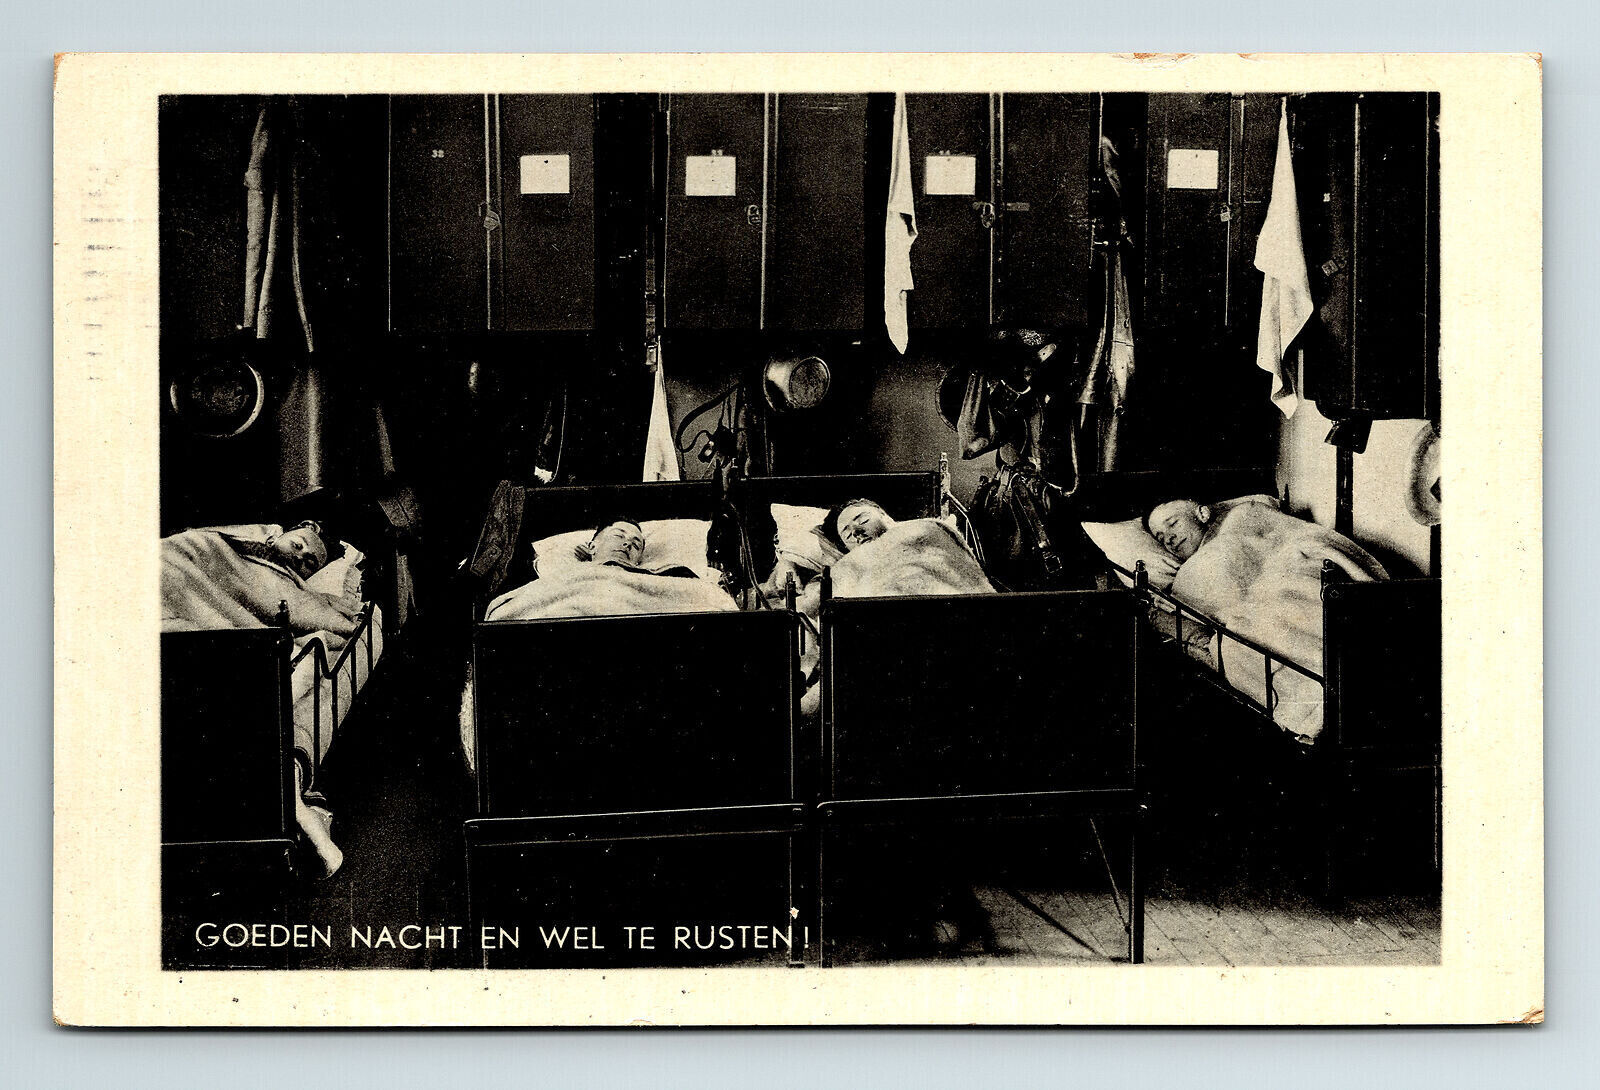 c1930s Postcard Good Night Dutch? Soldiers Resting in Beds Barracks